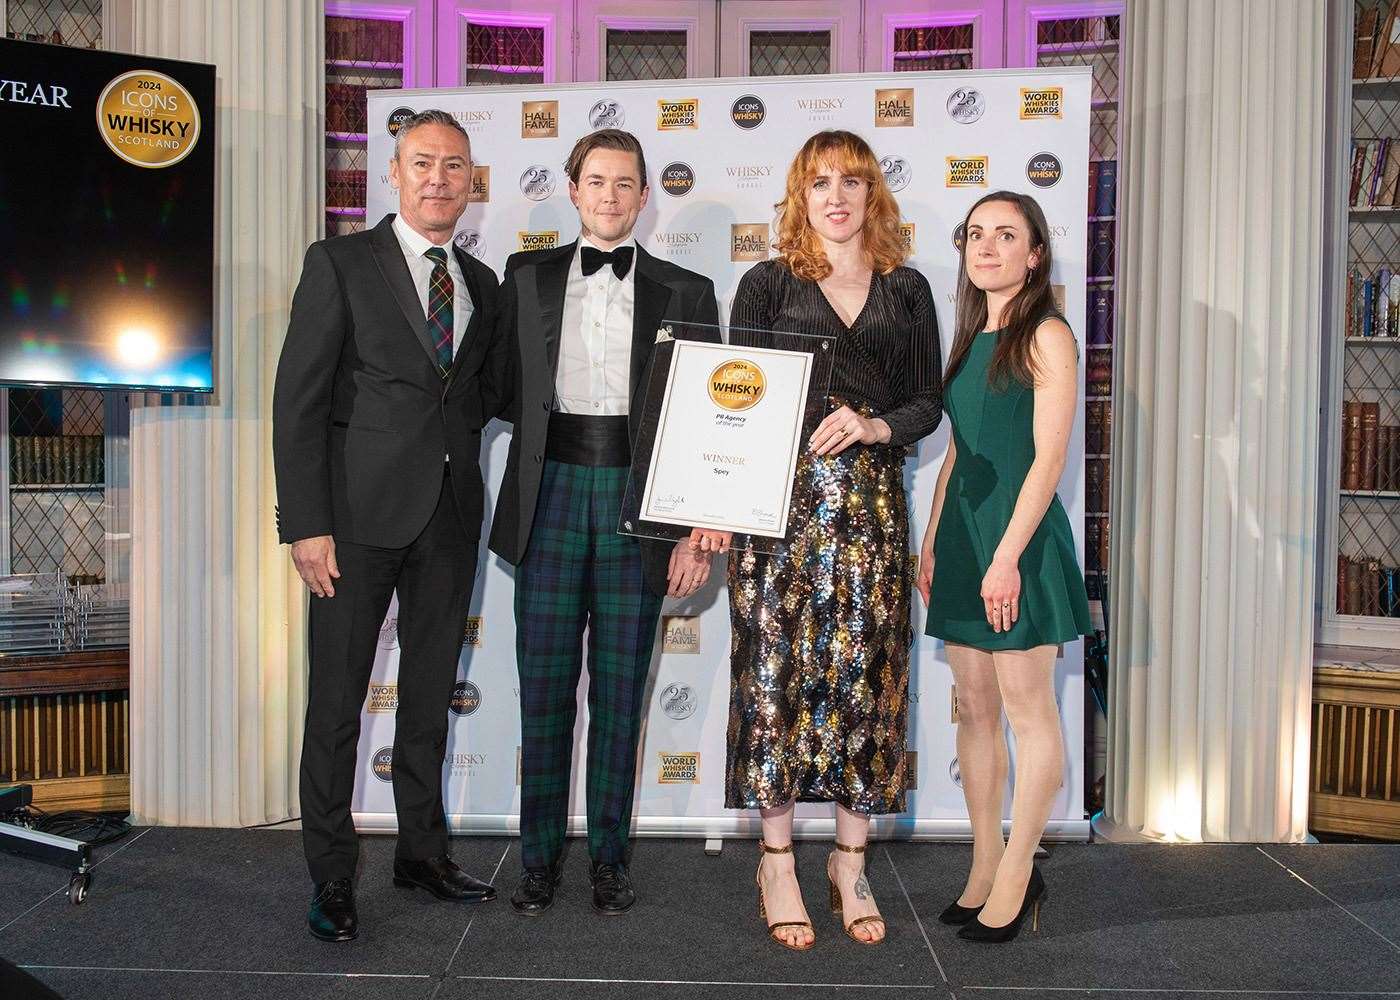 Spey PR's Jennifer Robertson (second from right) accepts Best PR Agency at the Icons of Whisky Awards.